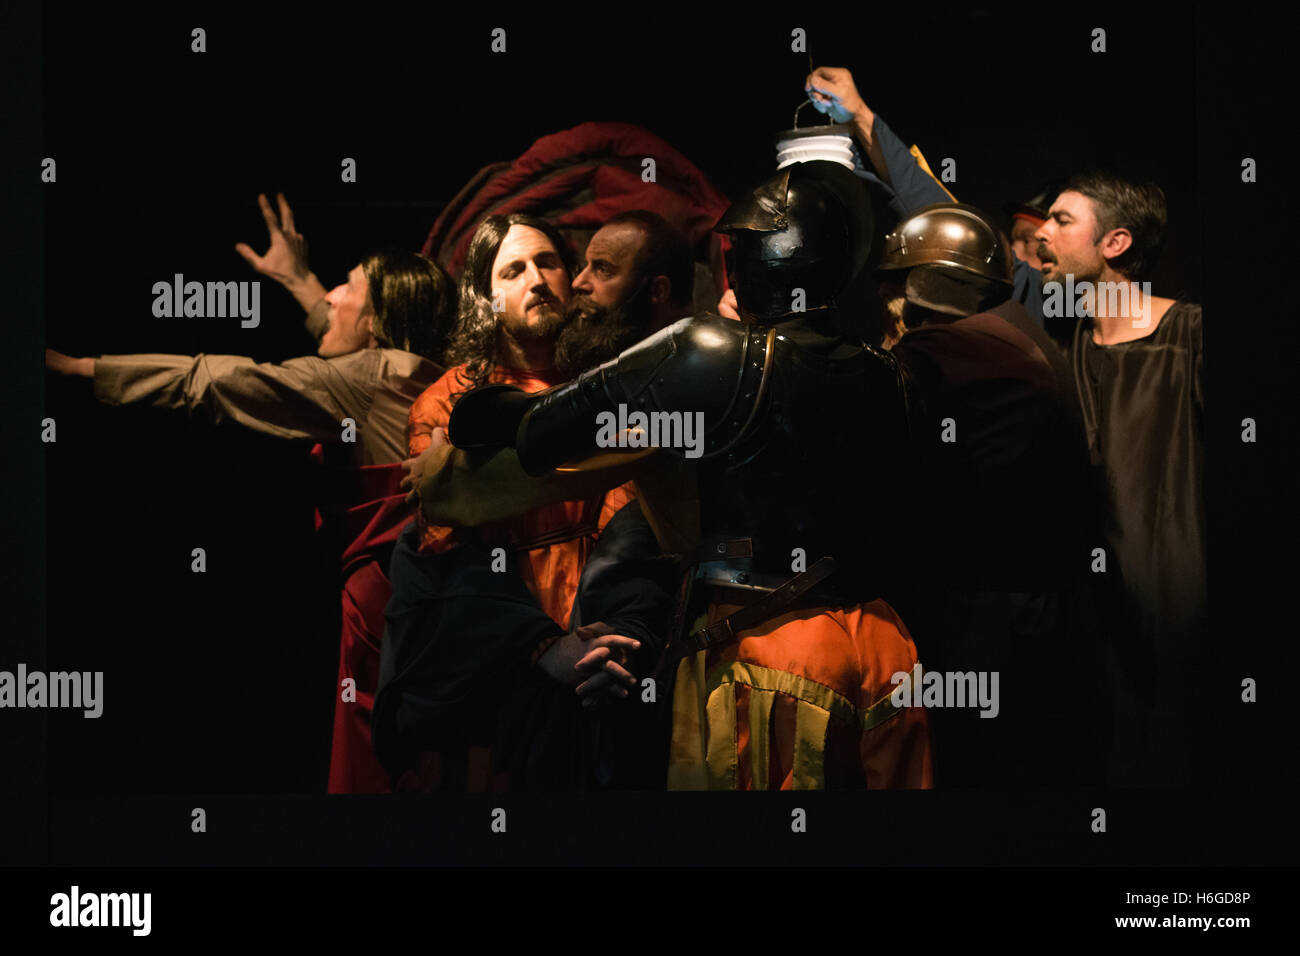 'The Taking of Christ' by Michelangelo Merisi da Caravaggio,part of the 'Living paintings' performance by actors from Avigliano Stock Photo